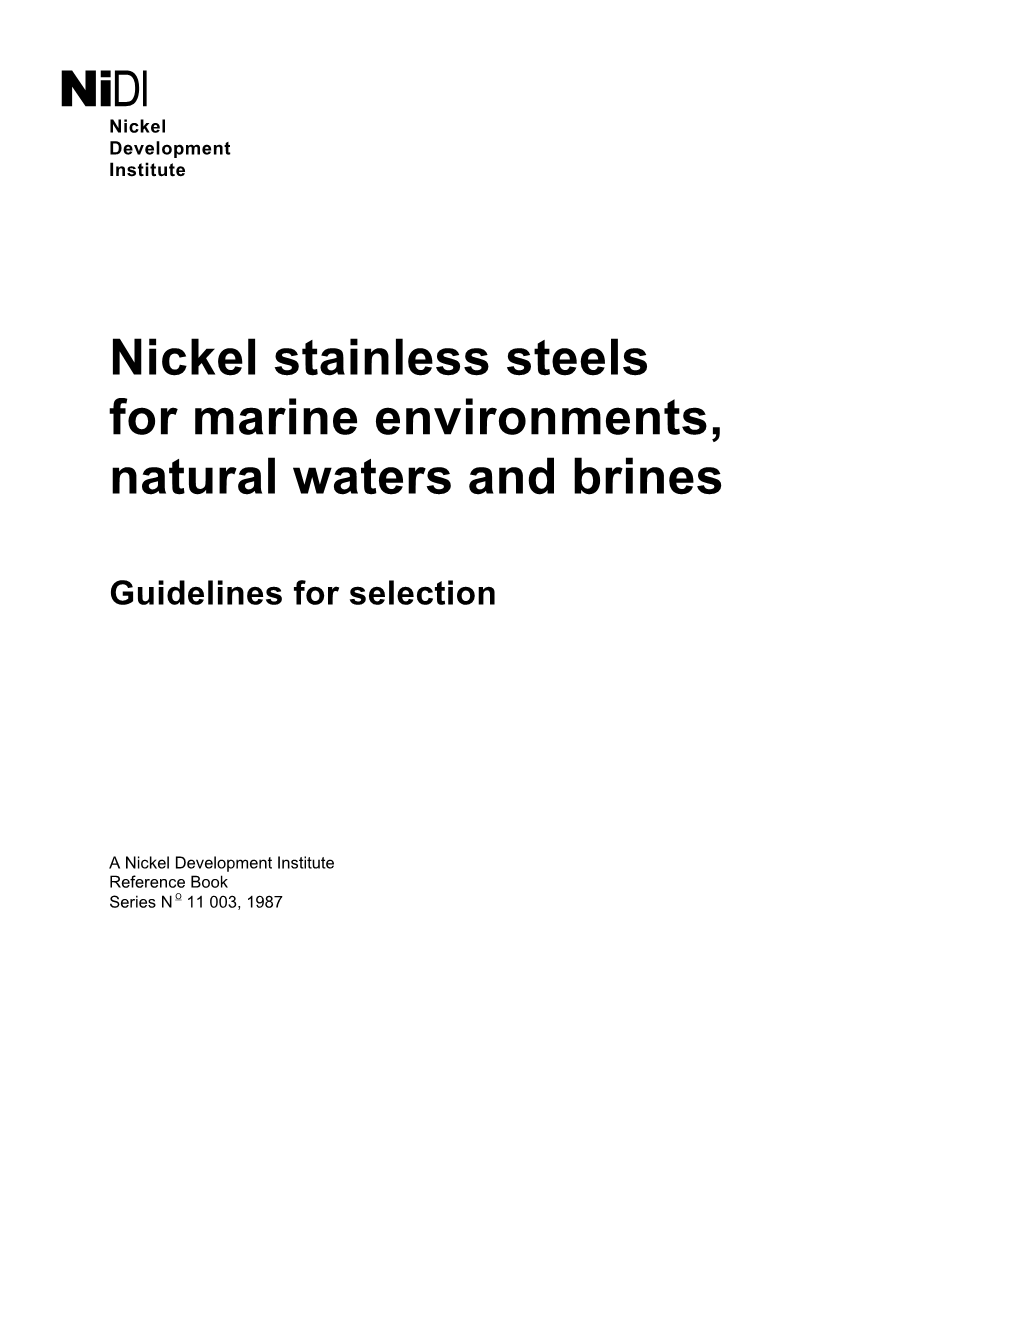 Nidl Nickel Stainless Steels for Marine Environments, Natural Waters And